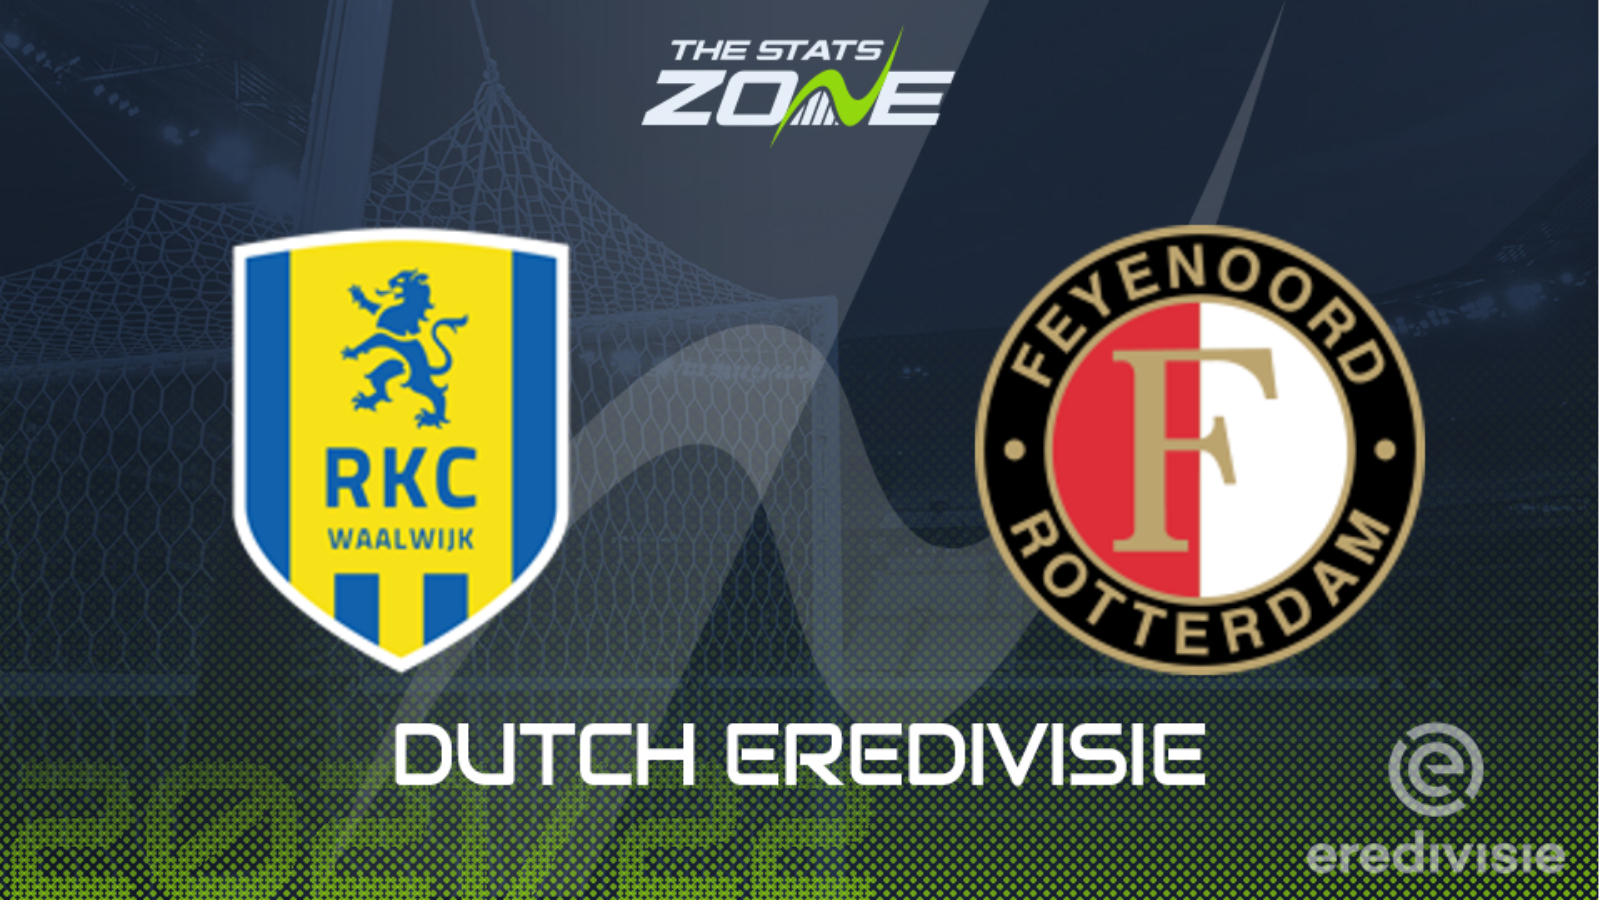 Rkc Waalwijk Vs Feyenoord Preview And Prediction The Stats Zone 3059